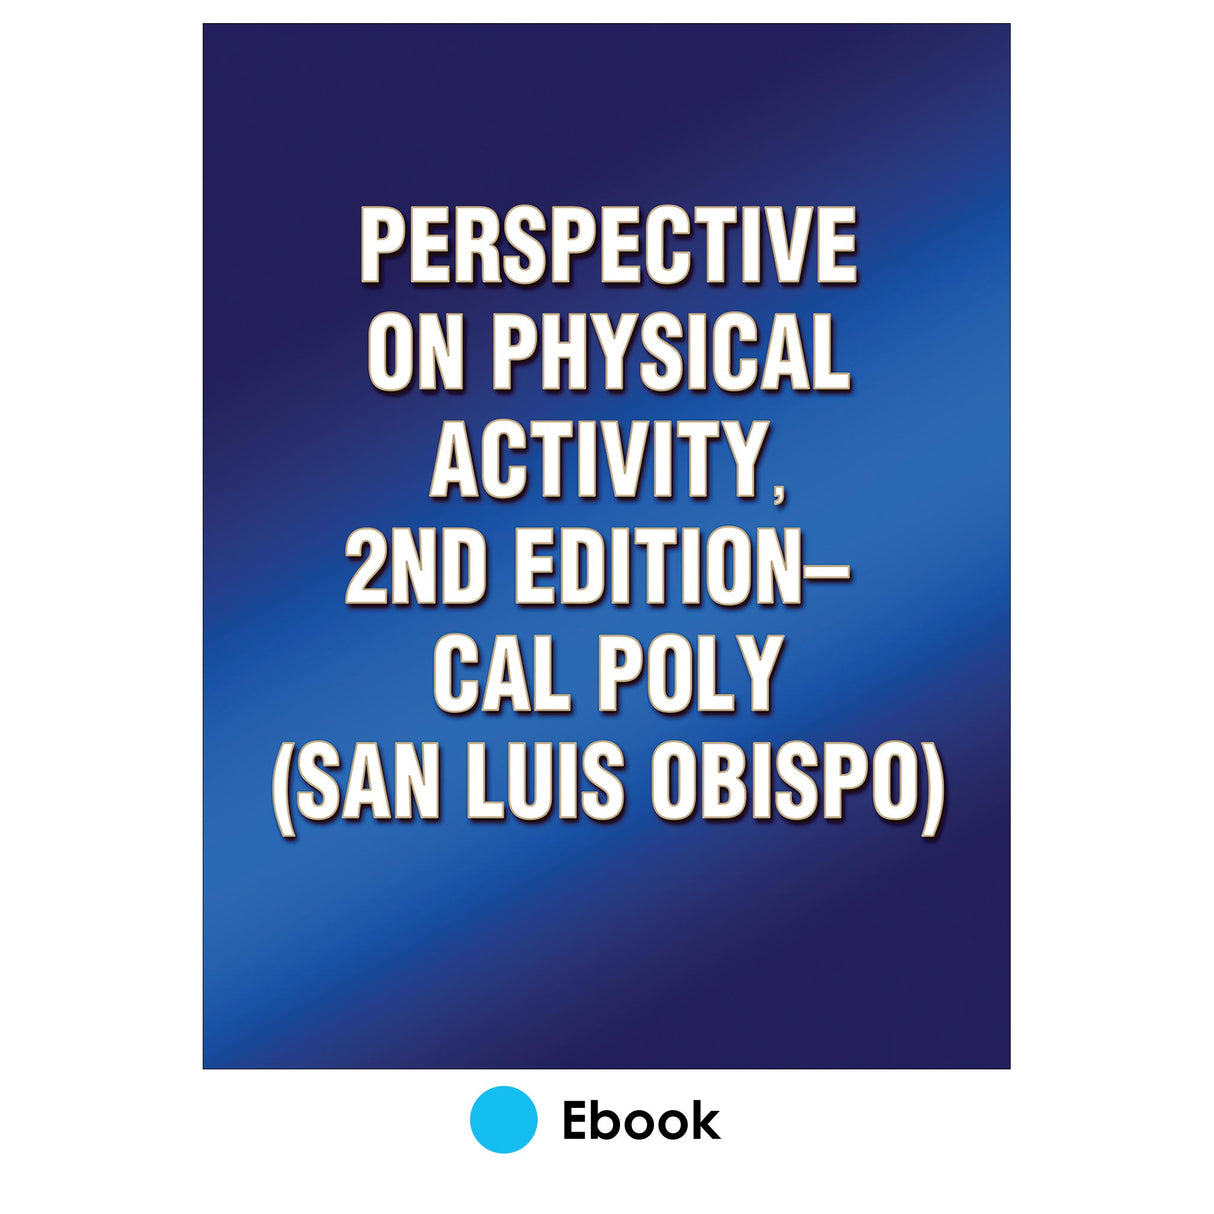 Perspectives on Physical Activity, 2nd Edition-Cal Poly (San Luis Obispo)